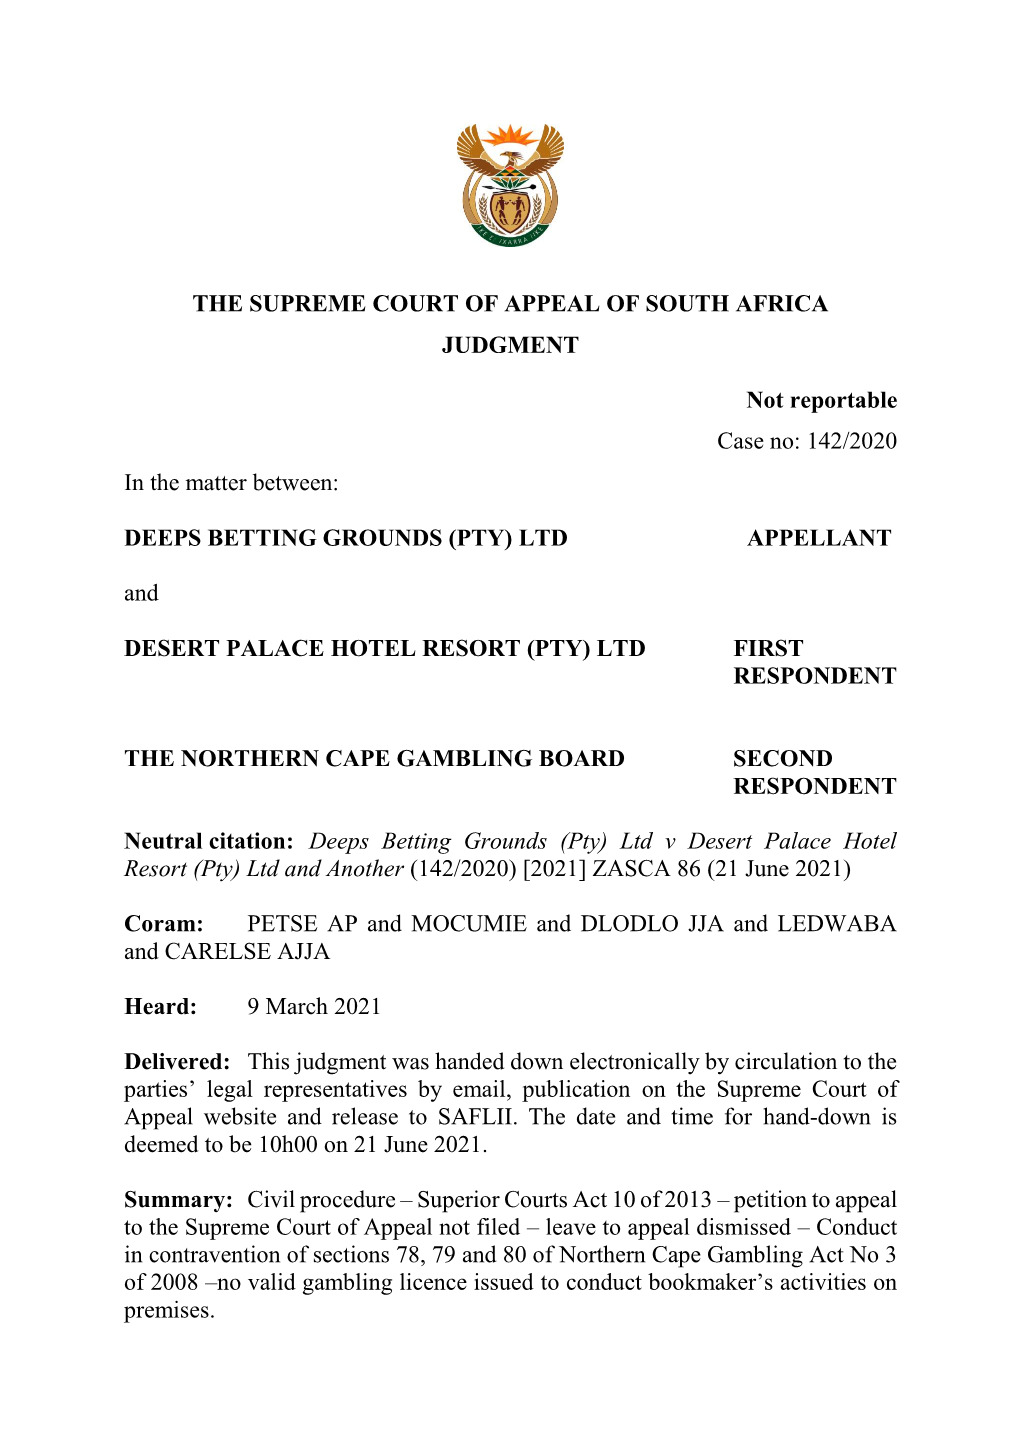 THE SUPREME COURT of APPEAL of SOUTH AFRICA JUDGMENT Not Reportable Case No: 142/2020 in the Matter Between: DEEPS BETTING GROU